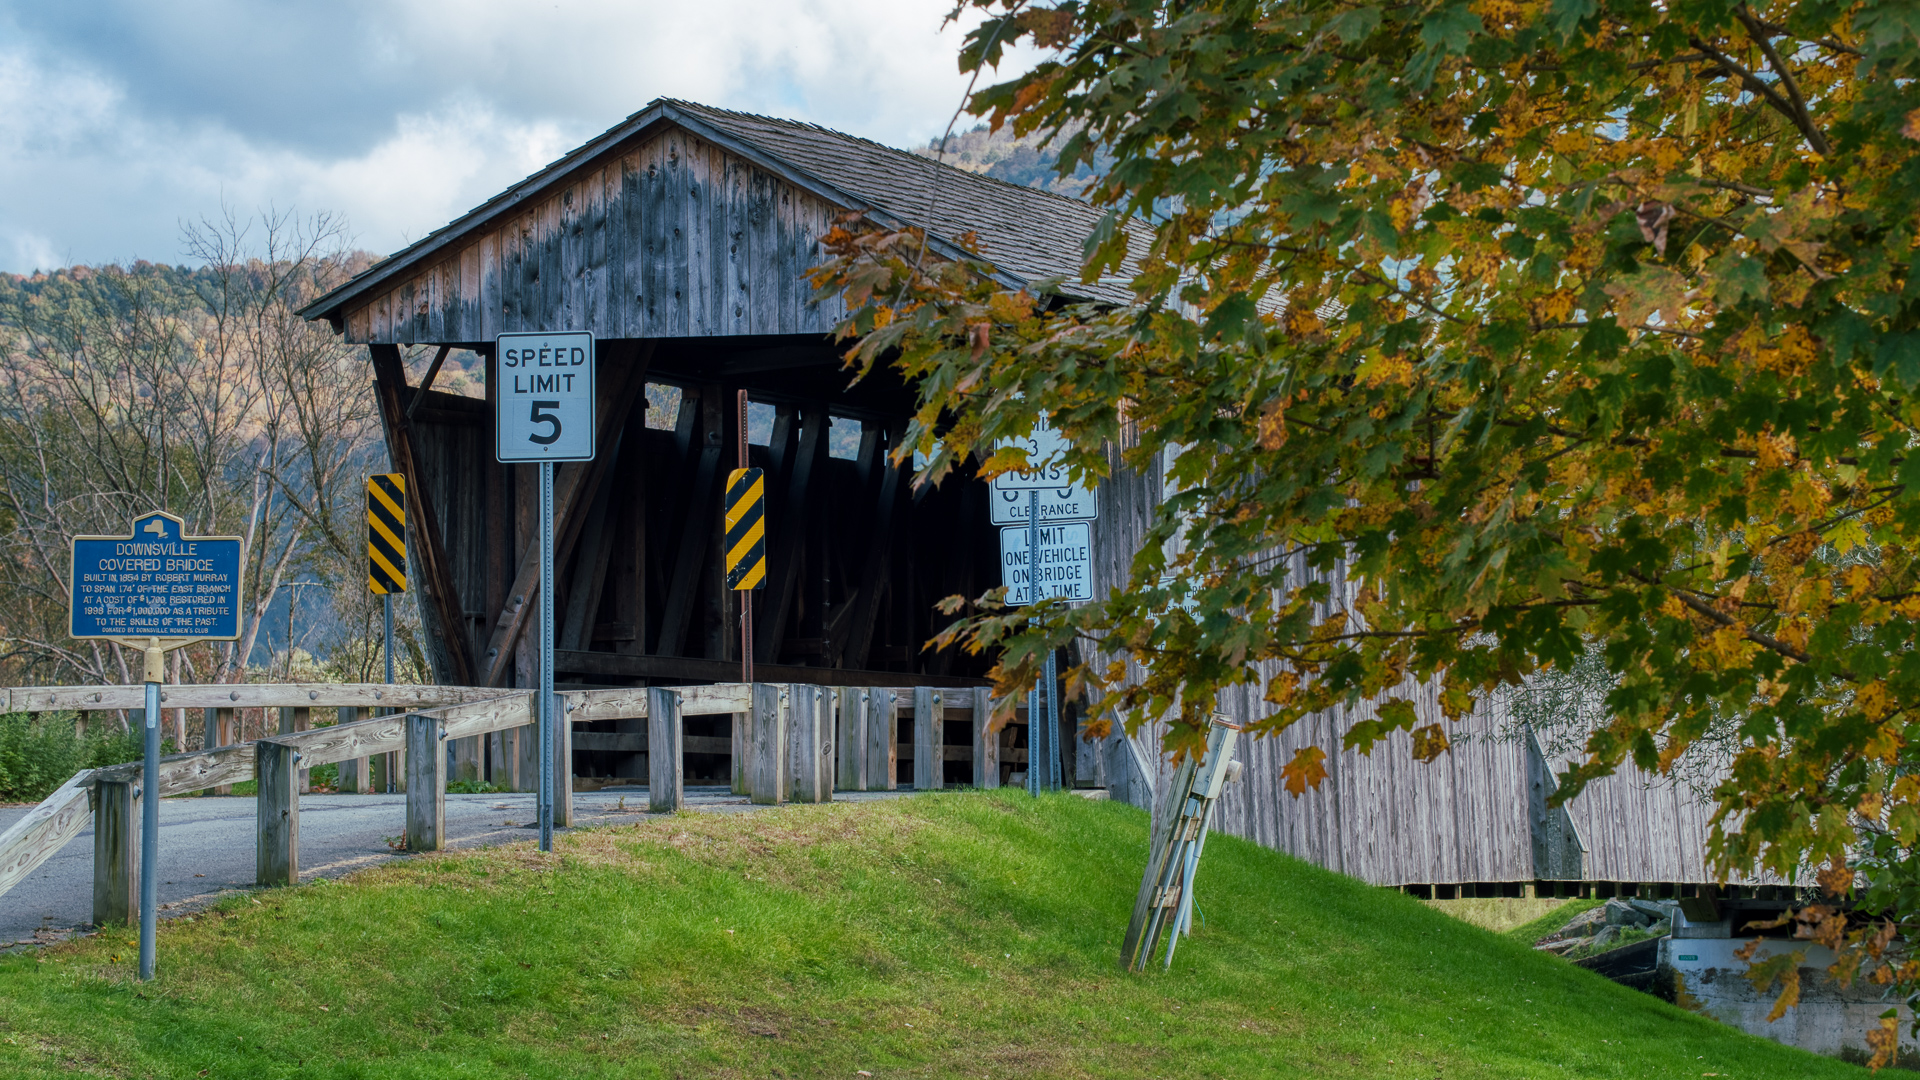 Historic Downsville covered bridge in western New York